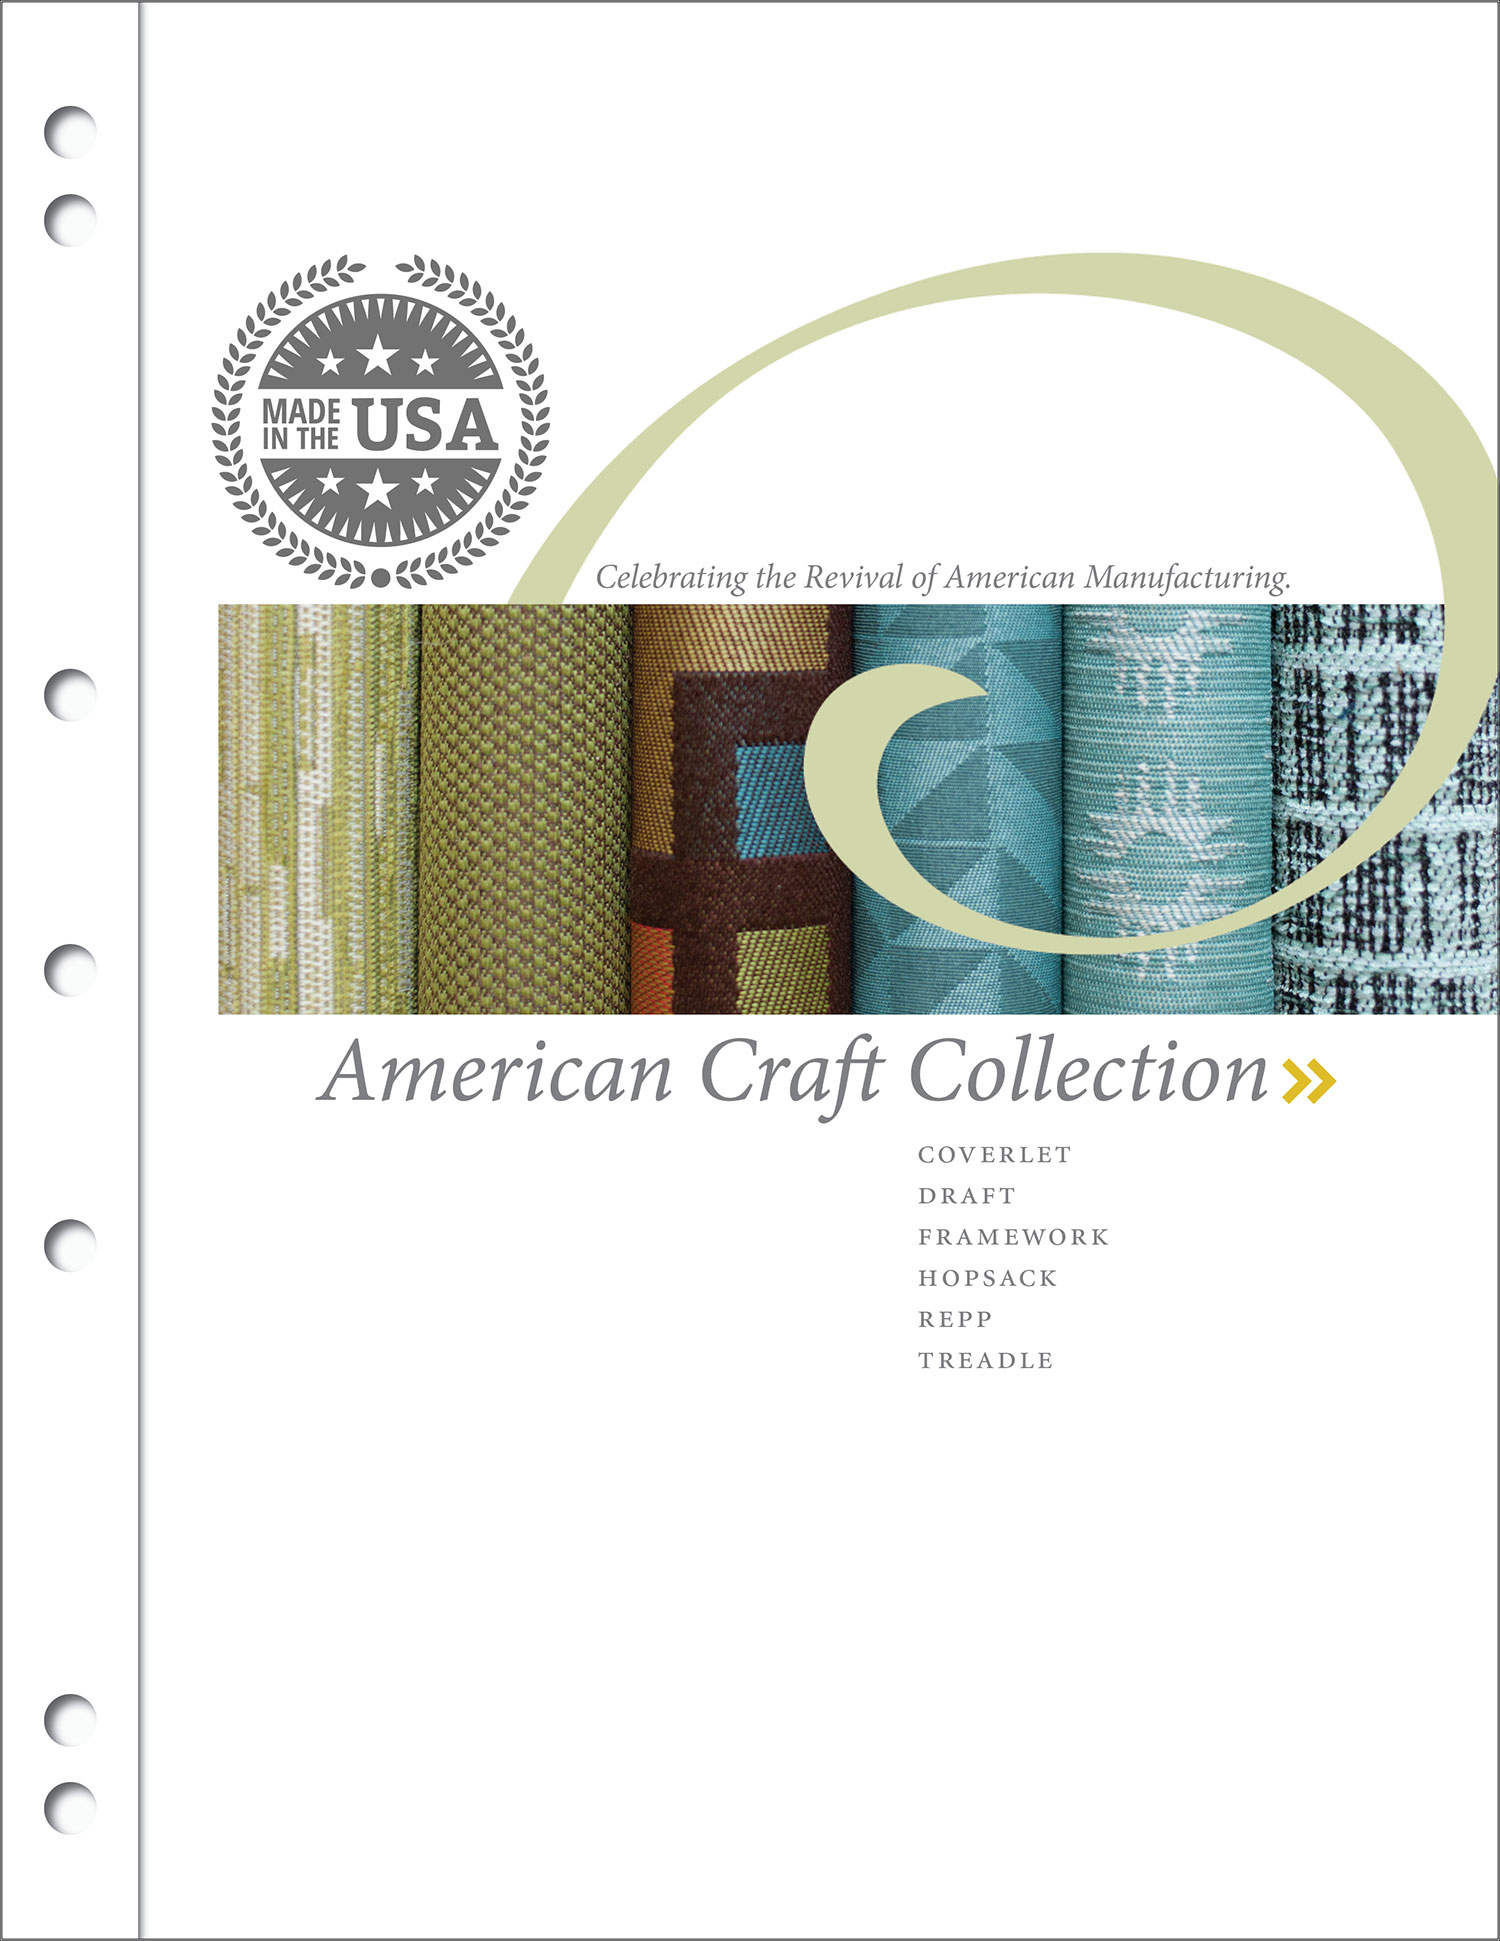 American-Craft-Collection-Card-Image.jpg